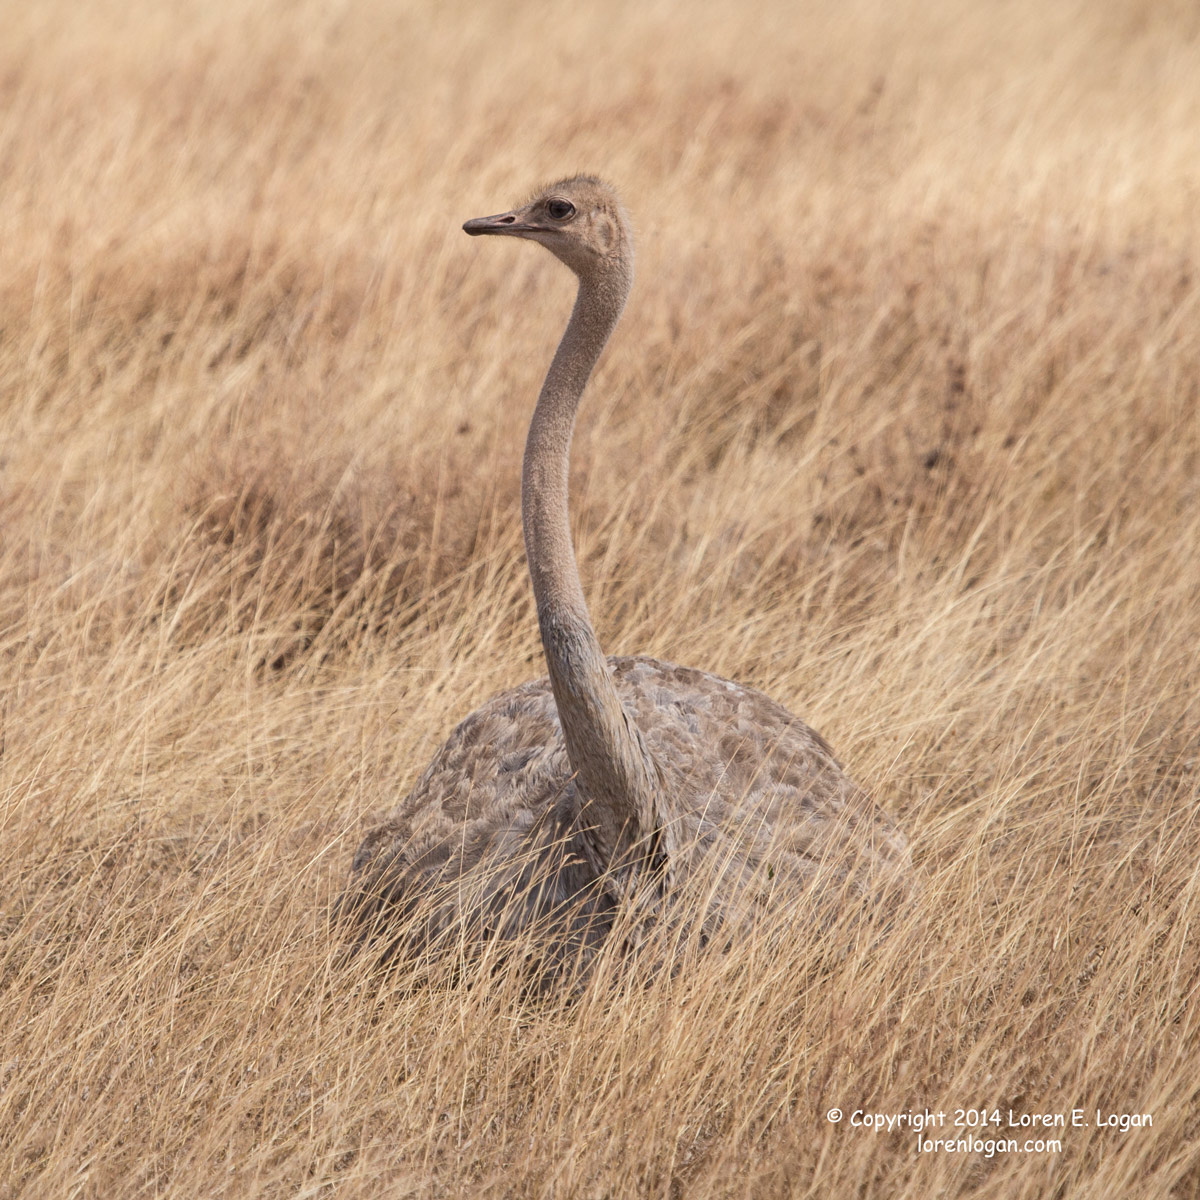 Stretching up for a view, this ostrich considers moving, but decides against it.